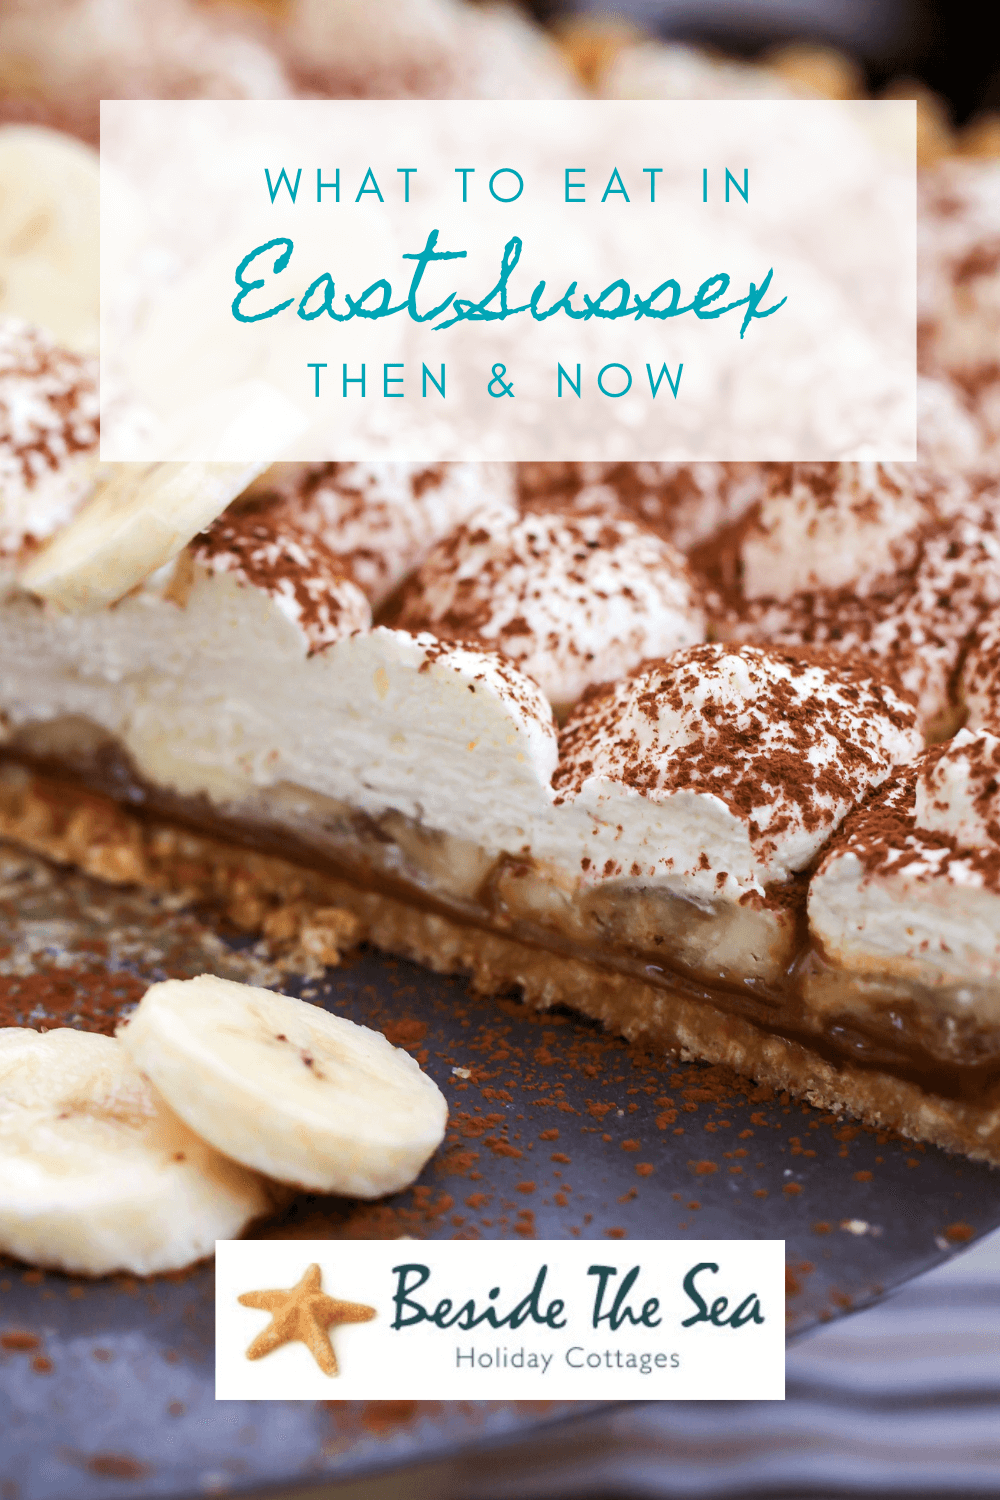 Banoffee Pie is a modern Sussex food tradition but there are many dating back centuries that you can still try when visit East Sussex